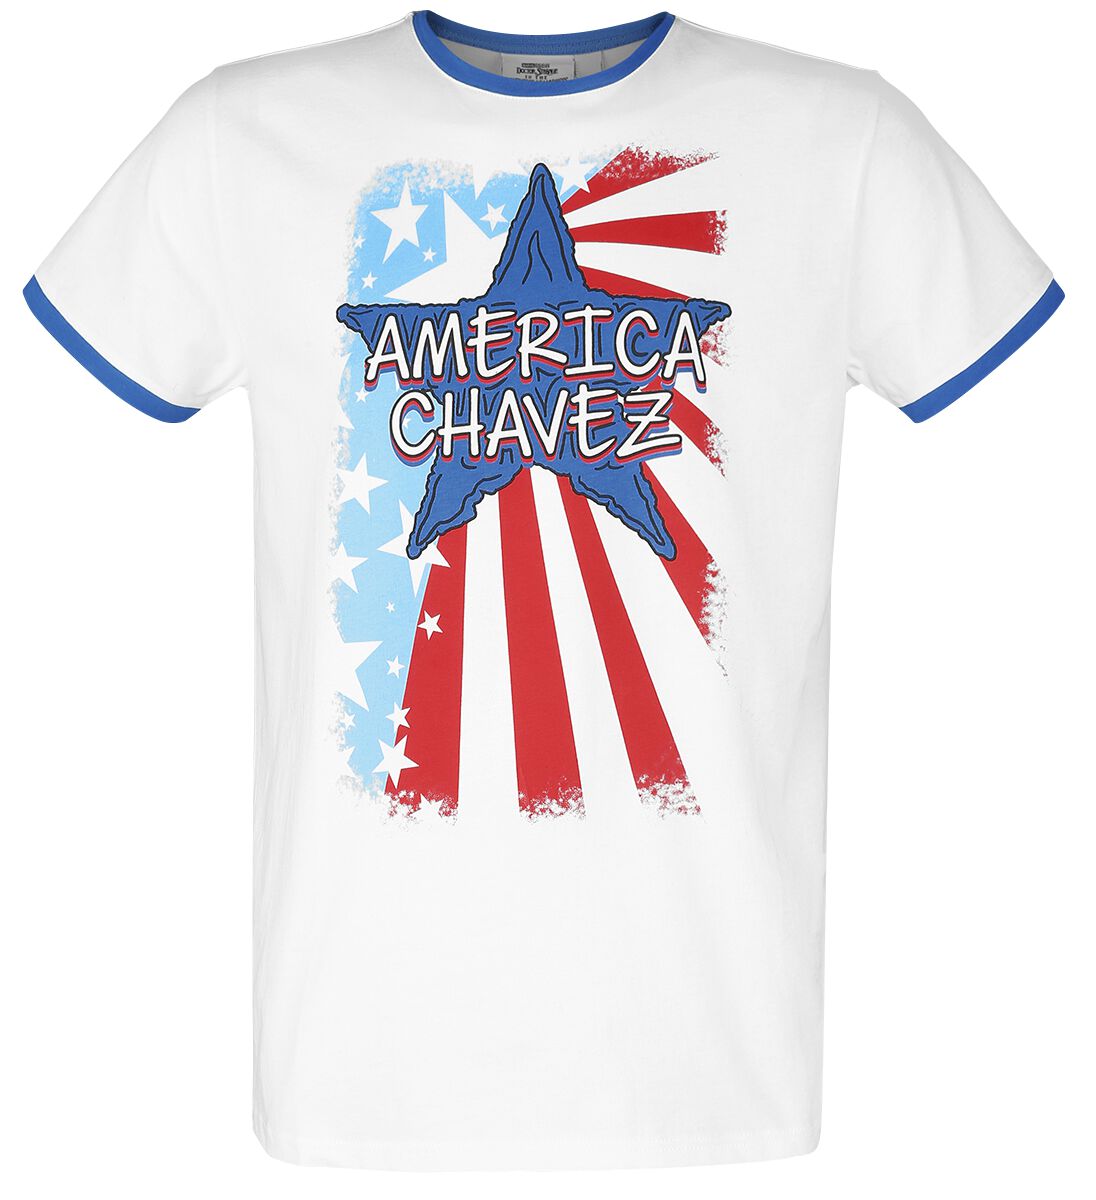 T-Shirt Manches courtes de Doctor Strange - In The Multiverse Of Madness - America Chavez - S à XXL 